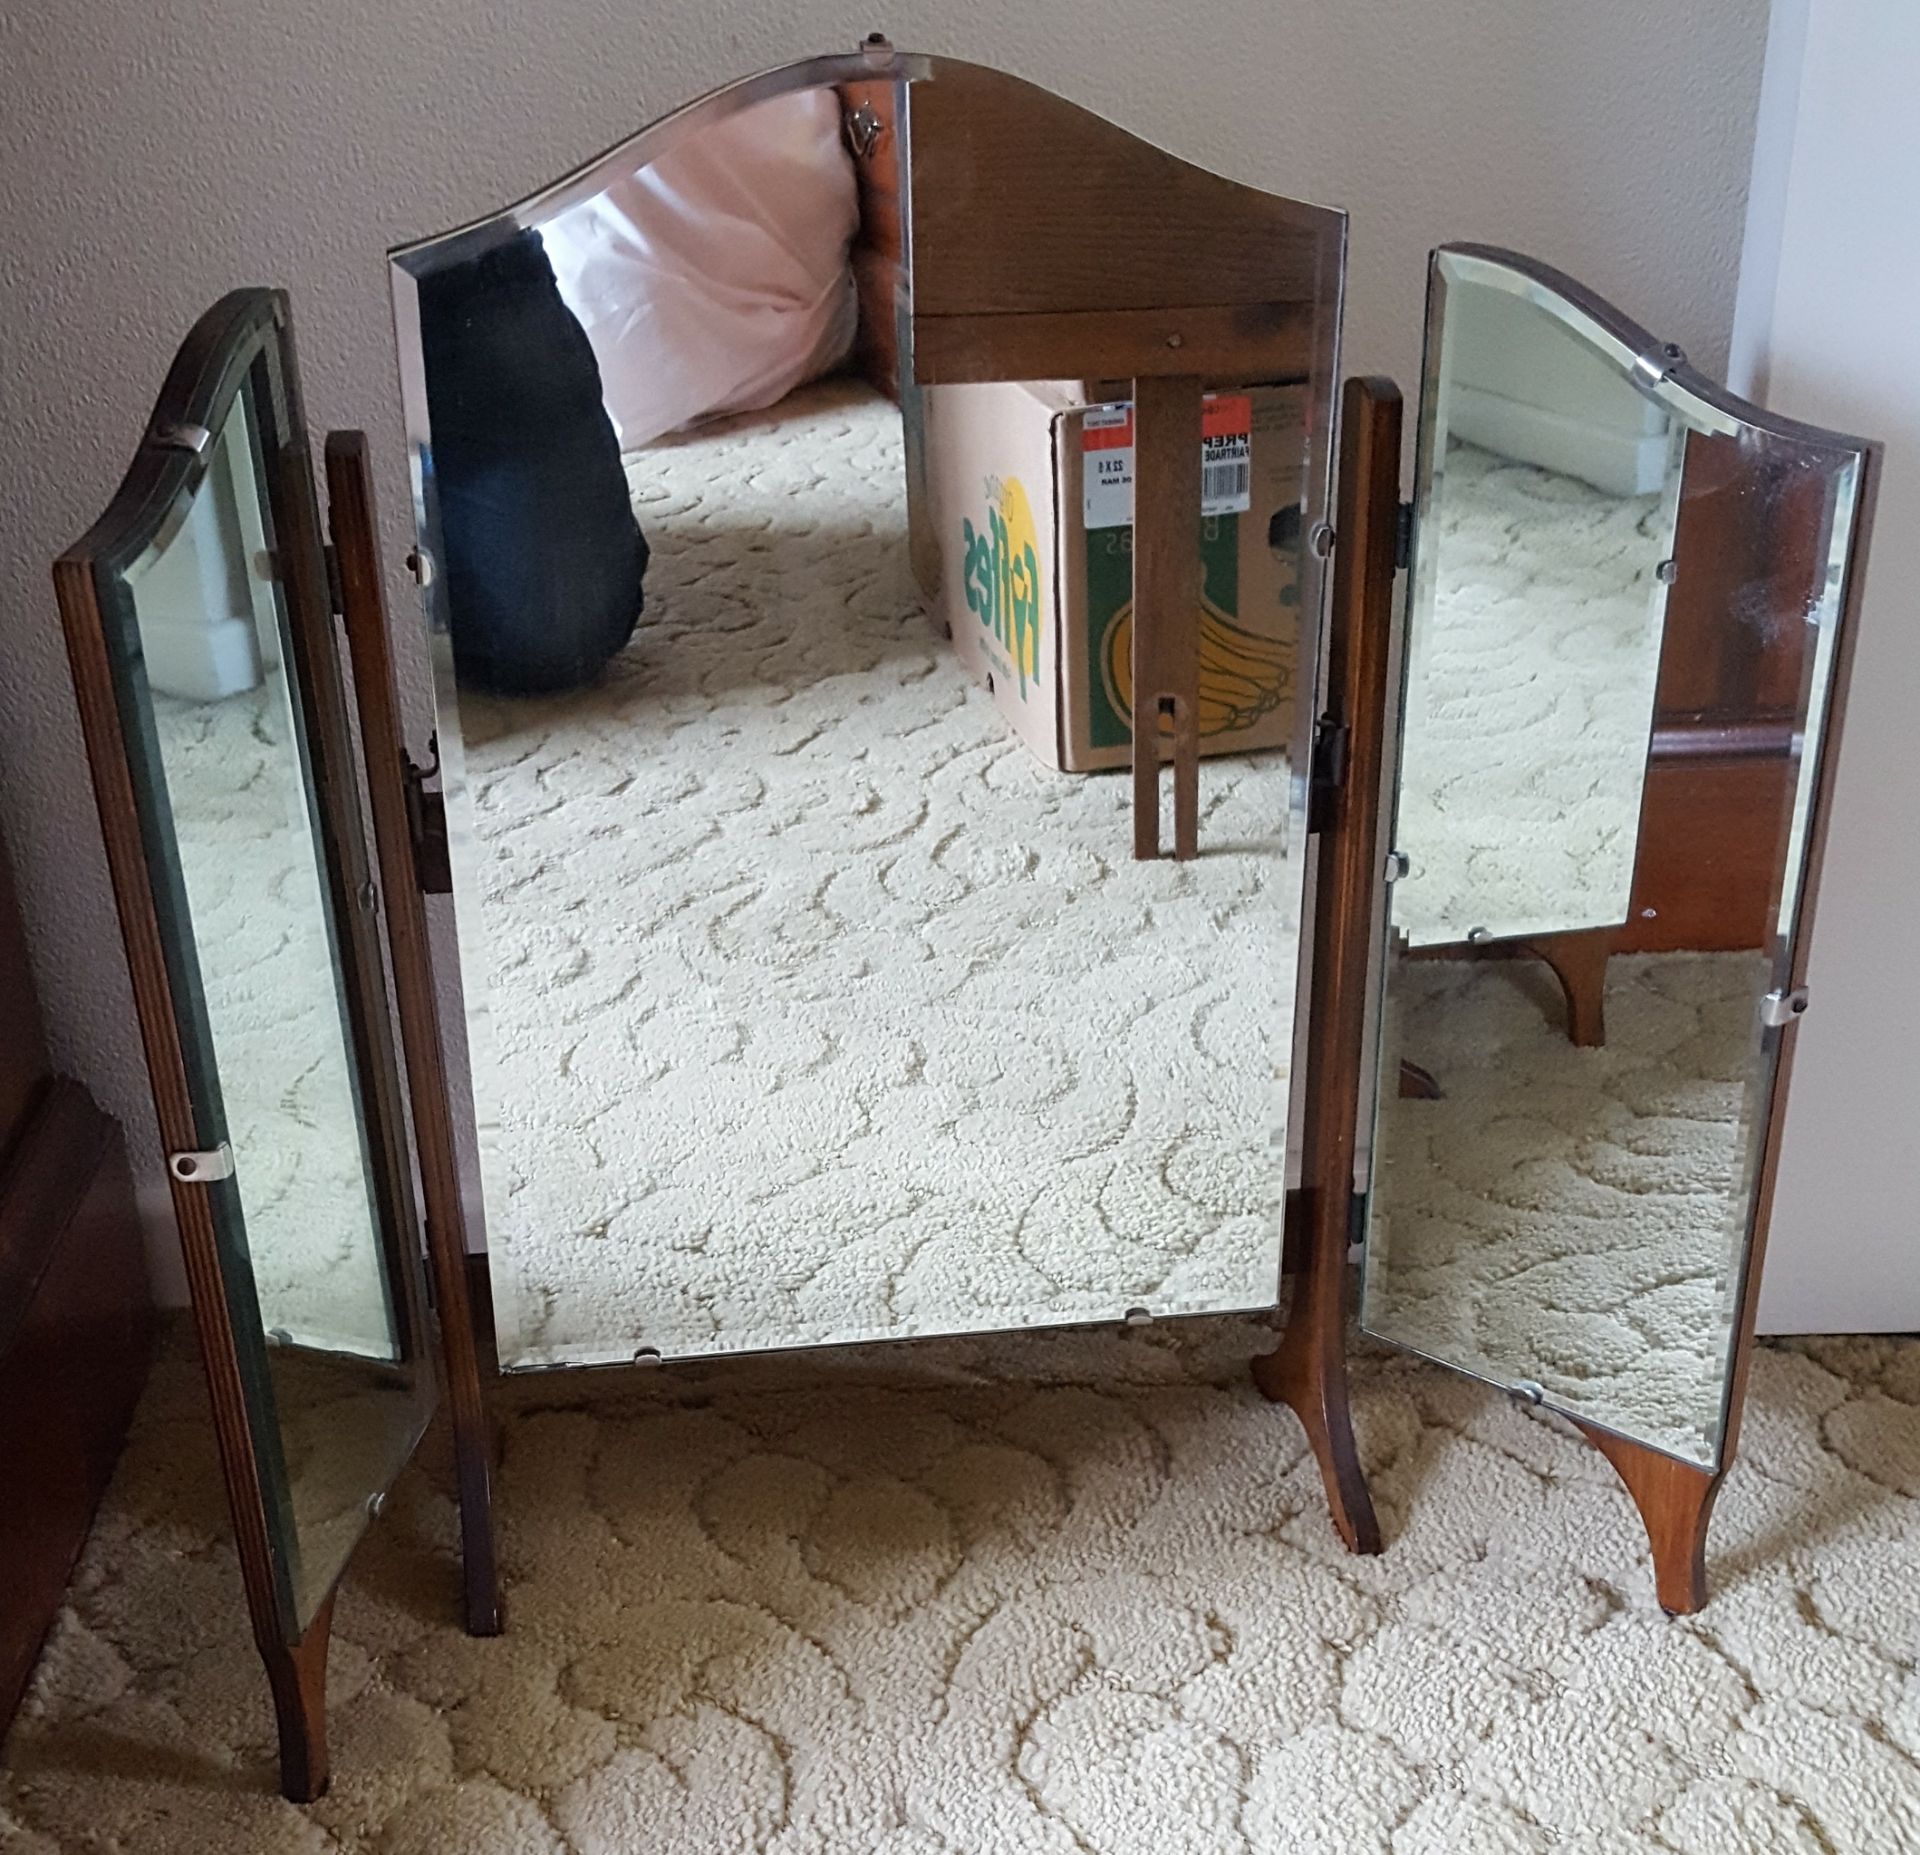 Vintage Bevelled Tri Fold Wooden Table Top Mirror c1930's NO RESERVE